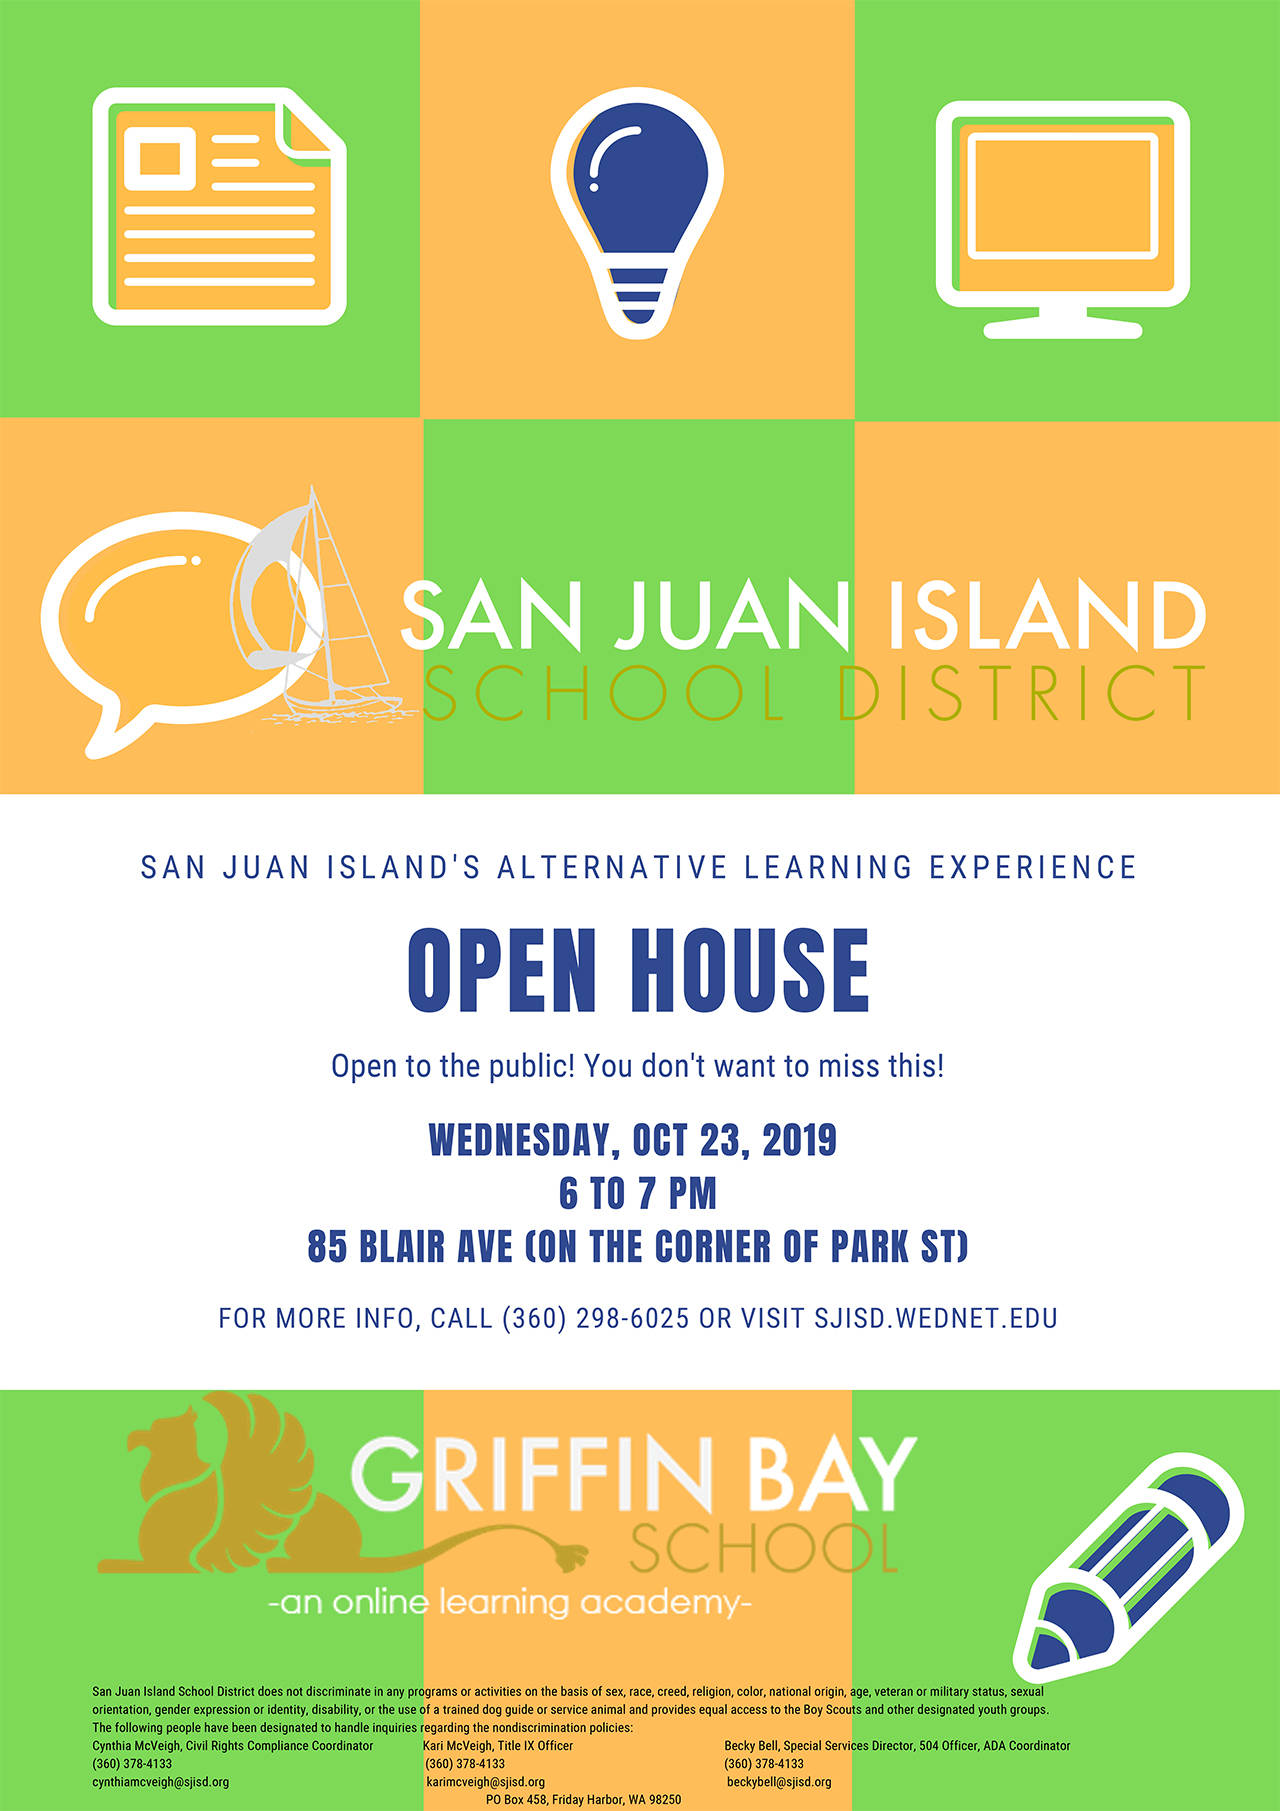 Griffin Bay open house, Oct. 23